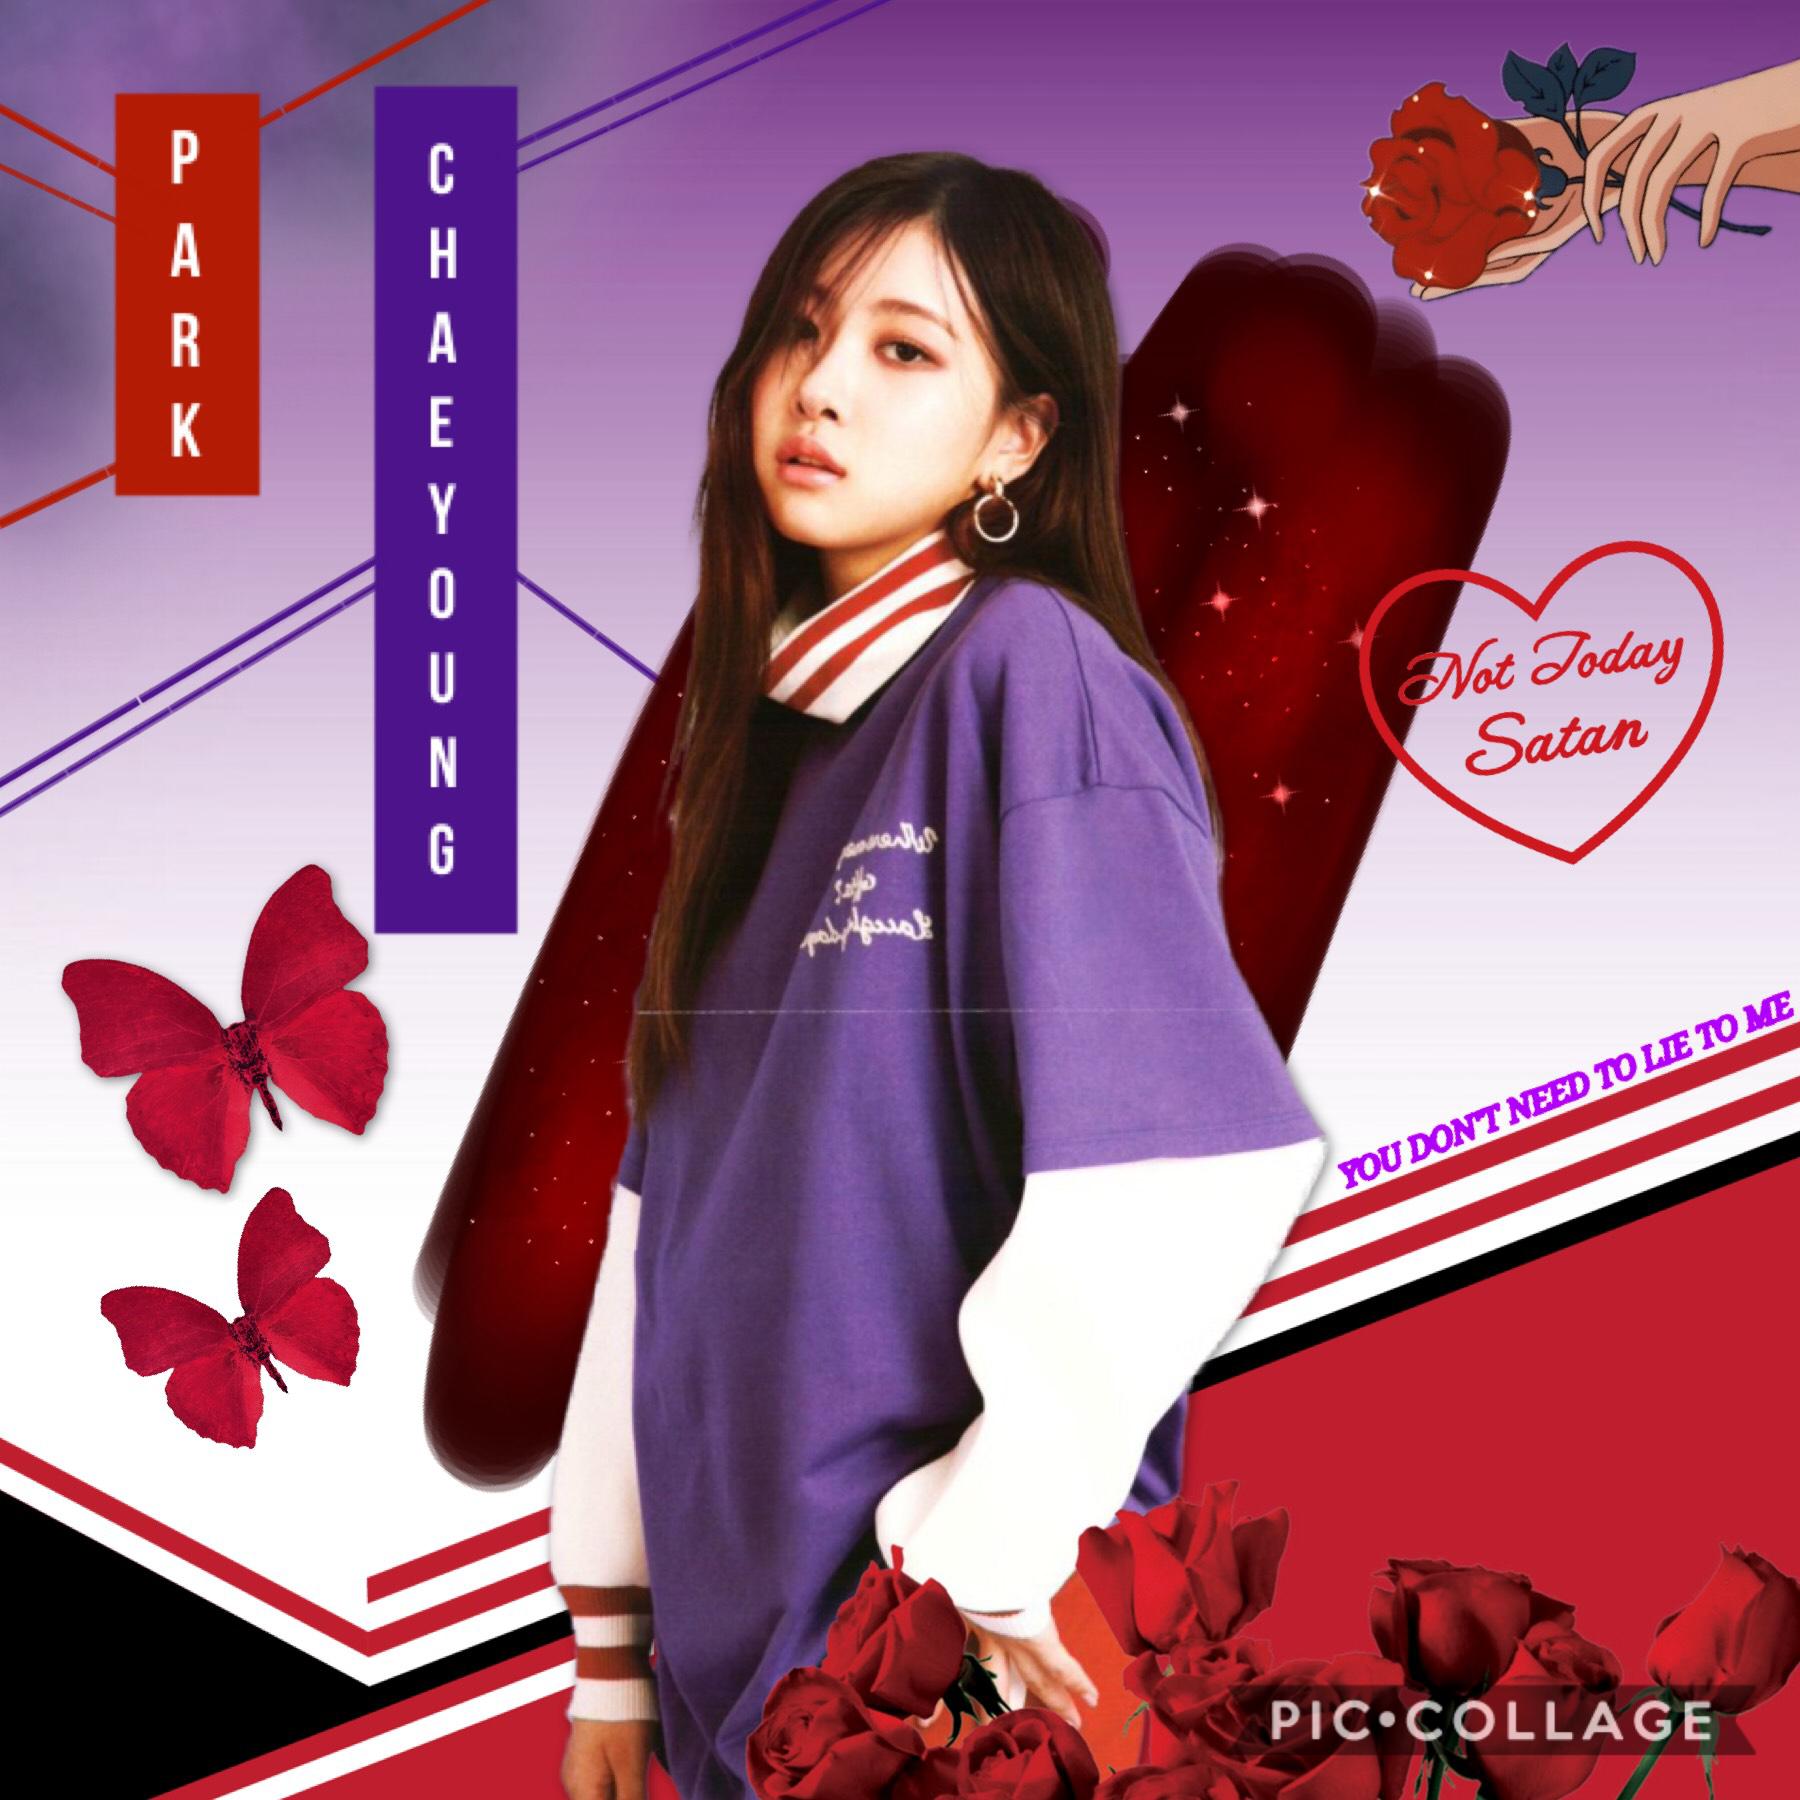 ❤️🍇TAP🍓💜
tried something new! 

and Rosé is being mistreated!! istg if YG keeps treating her like that...

how’s your day been?